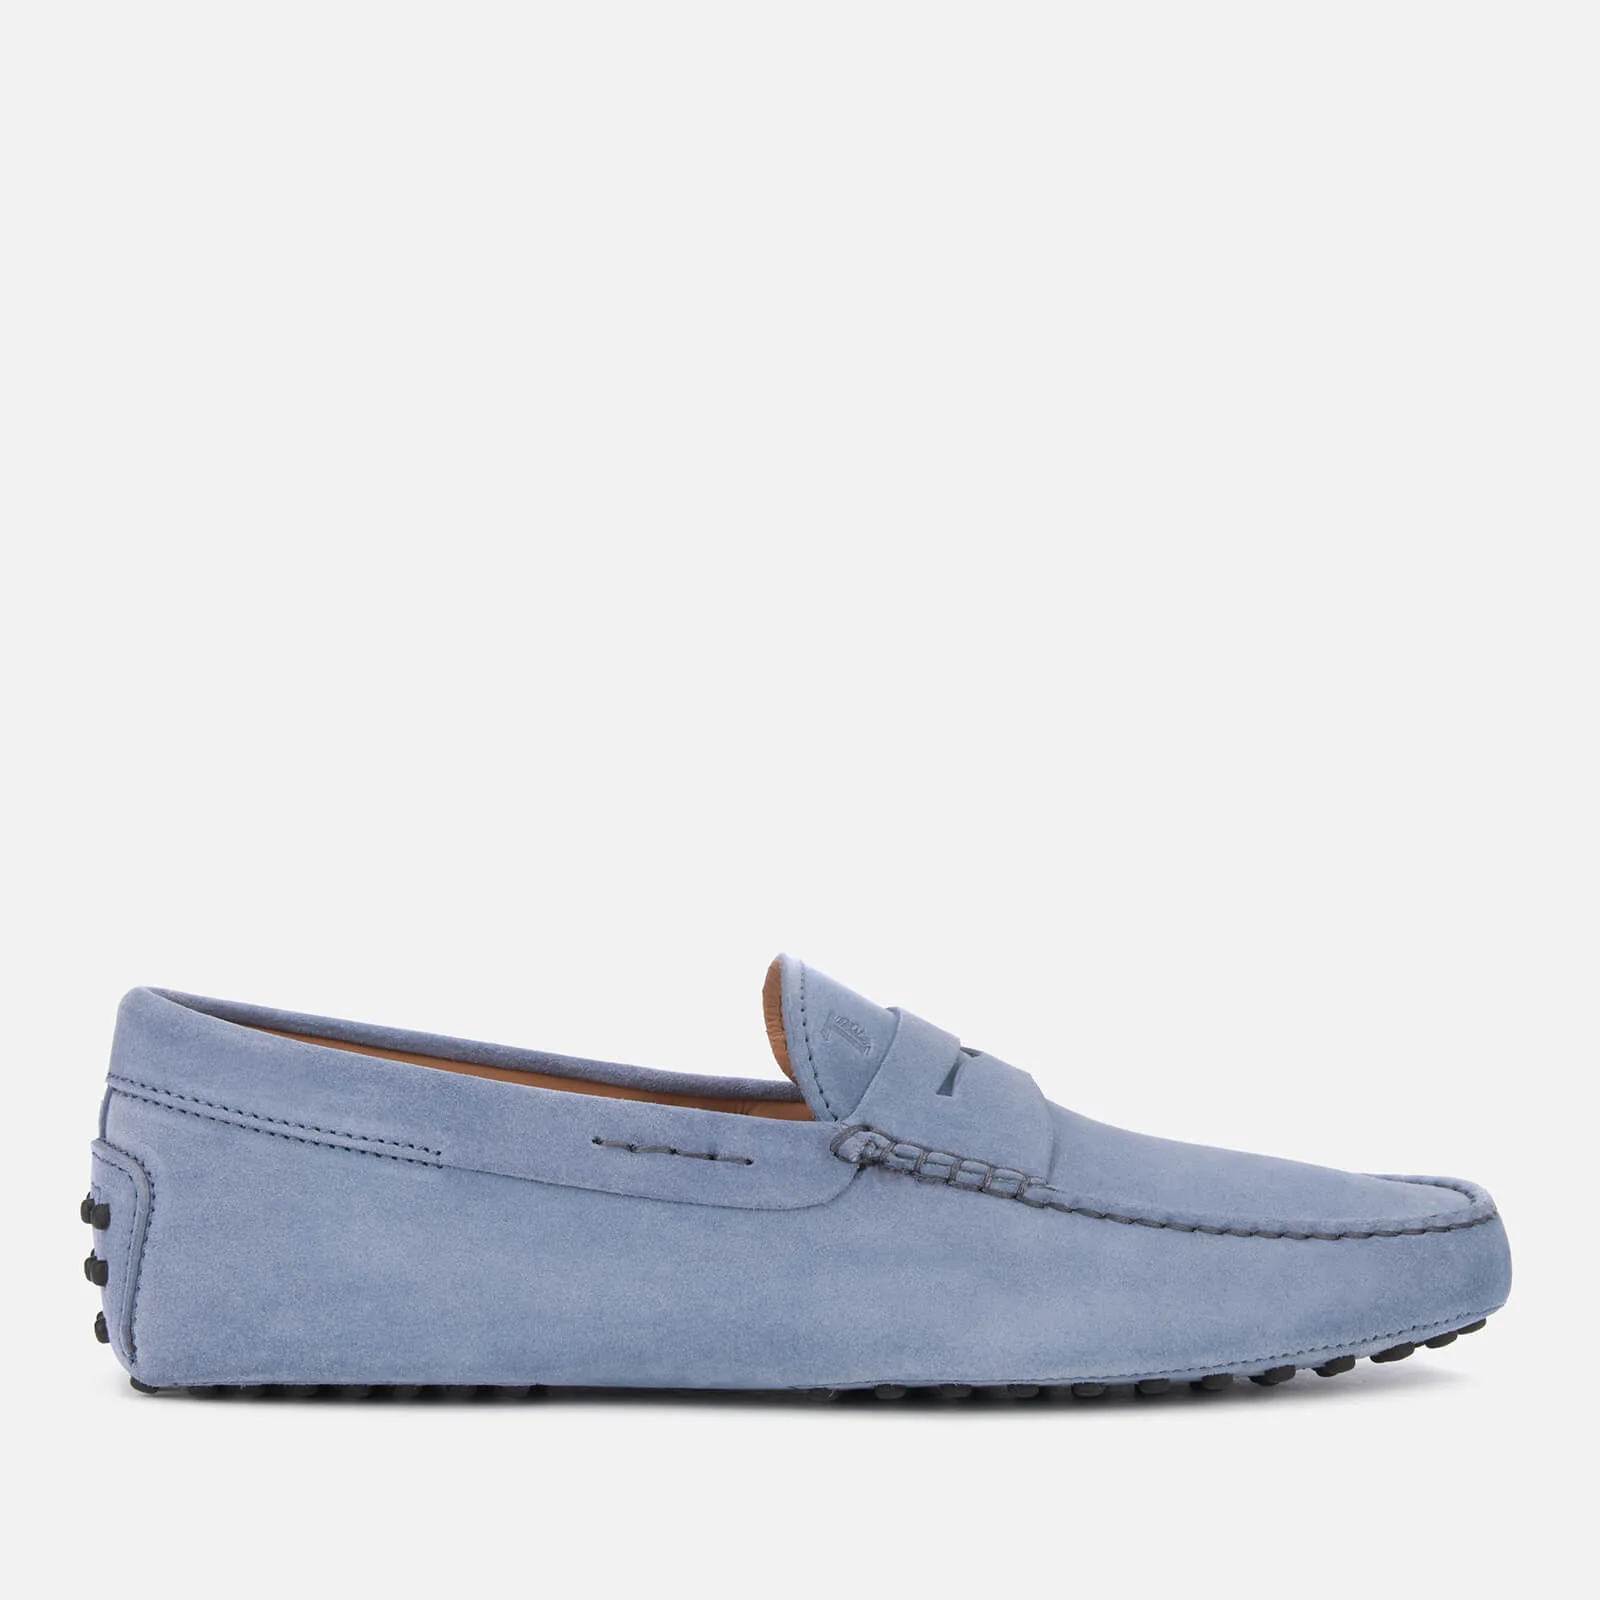 Tod's Men's New Gommino Loafers - Stone Washed Image 1